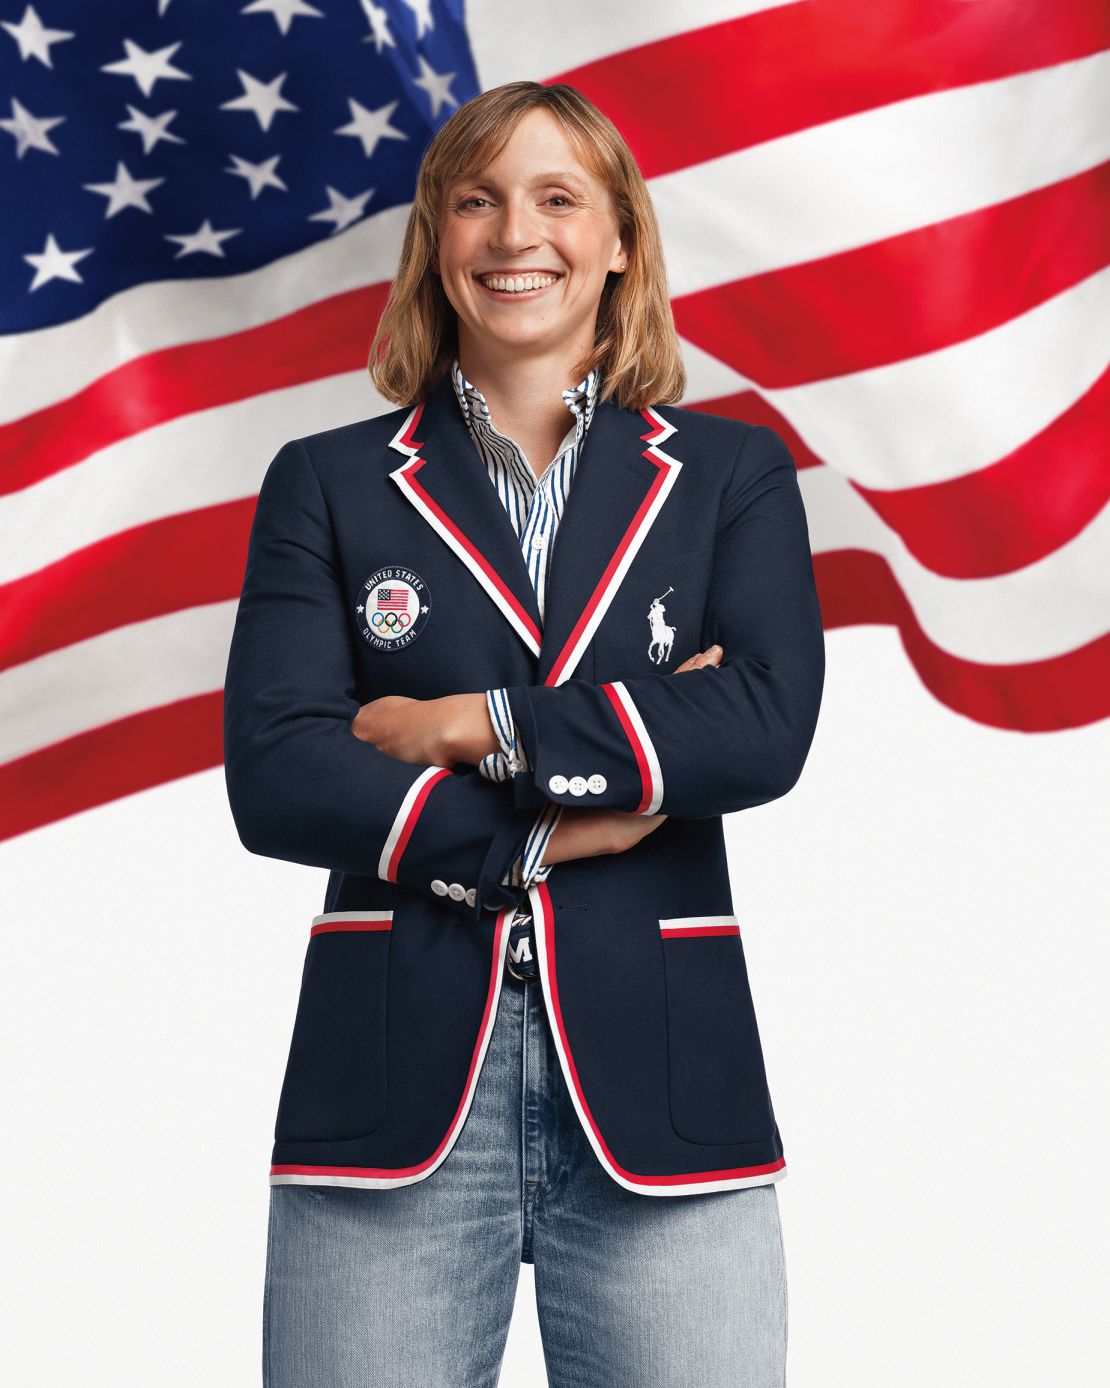 Four-time Olympian (and winner of 10 medals — seven gold, three silver — across her previous Games) swimmer Katie Ledecky poses in the opening ceremony look.